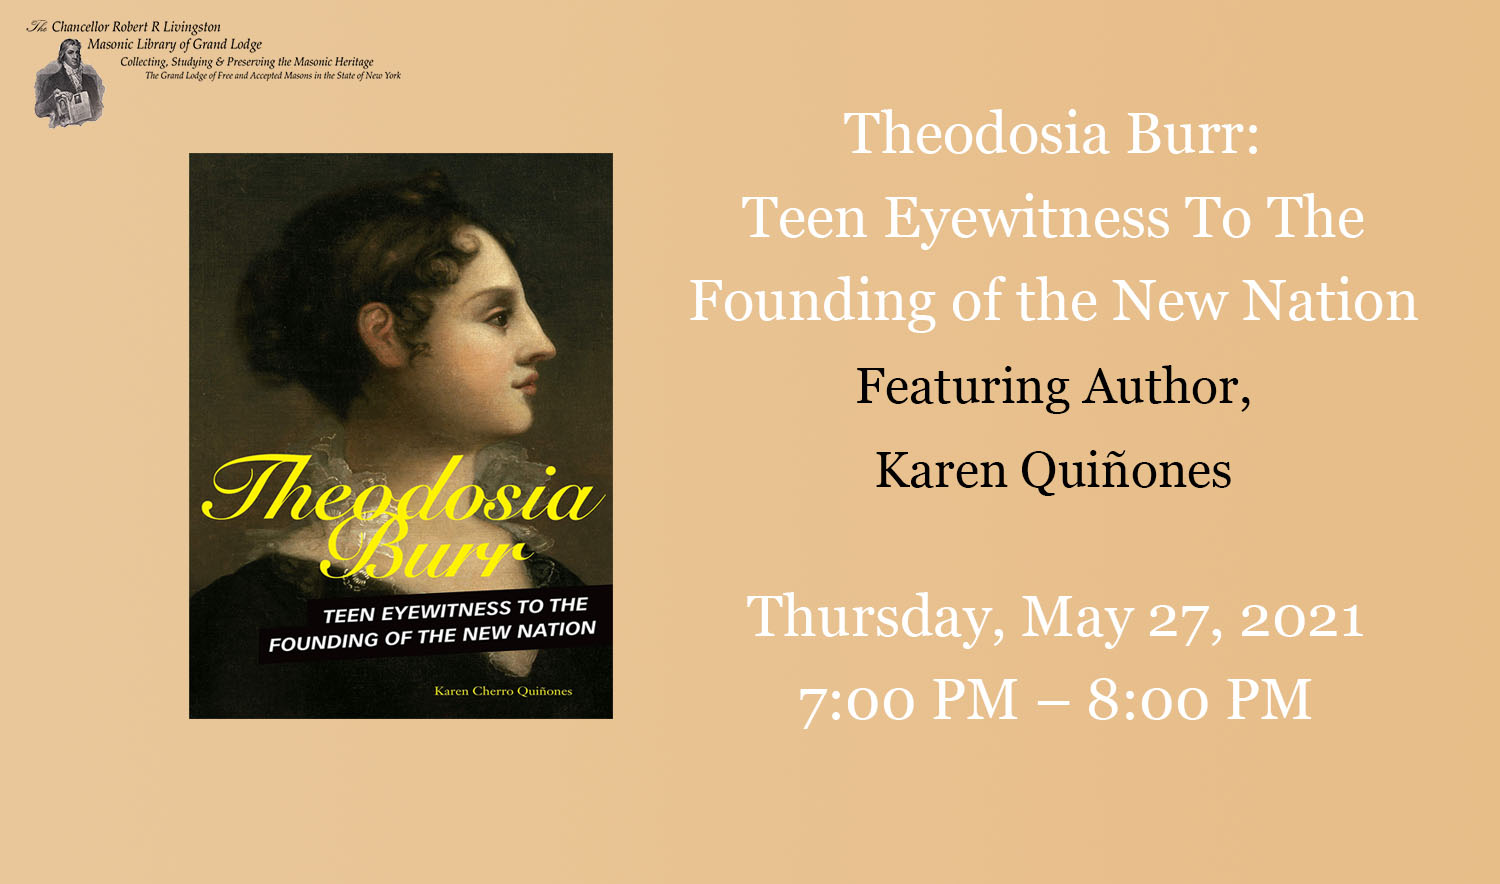 Cover image of Theodosia Burr: Teen Eyewitness to the Founding of the New Nation” Lecture title: Theodosia Burr: Teen Eyewitness to the Founding of the New Nation” featuring Karen Quiñones Thursday May 27th, 2021 at